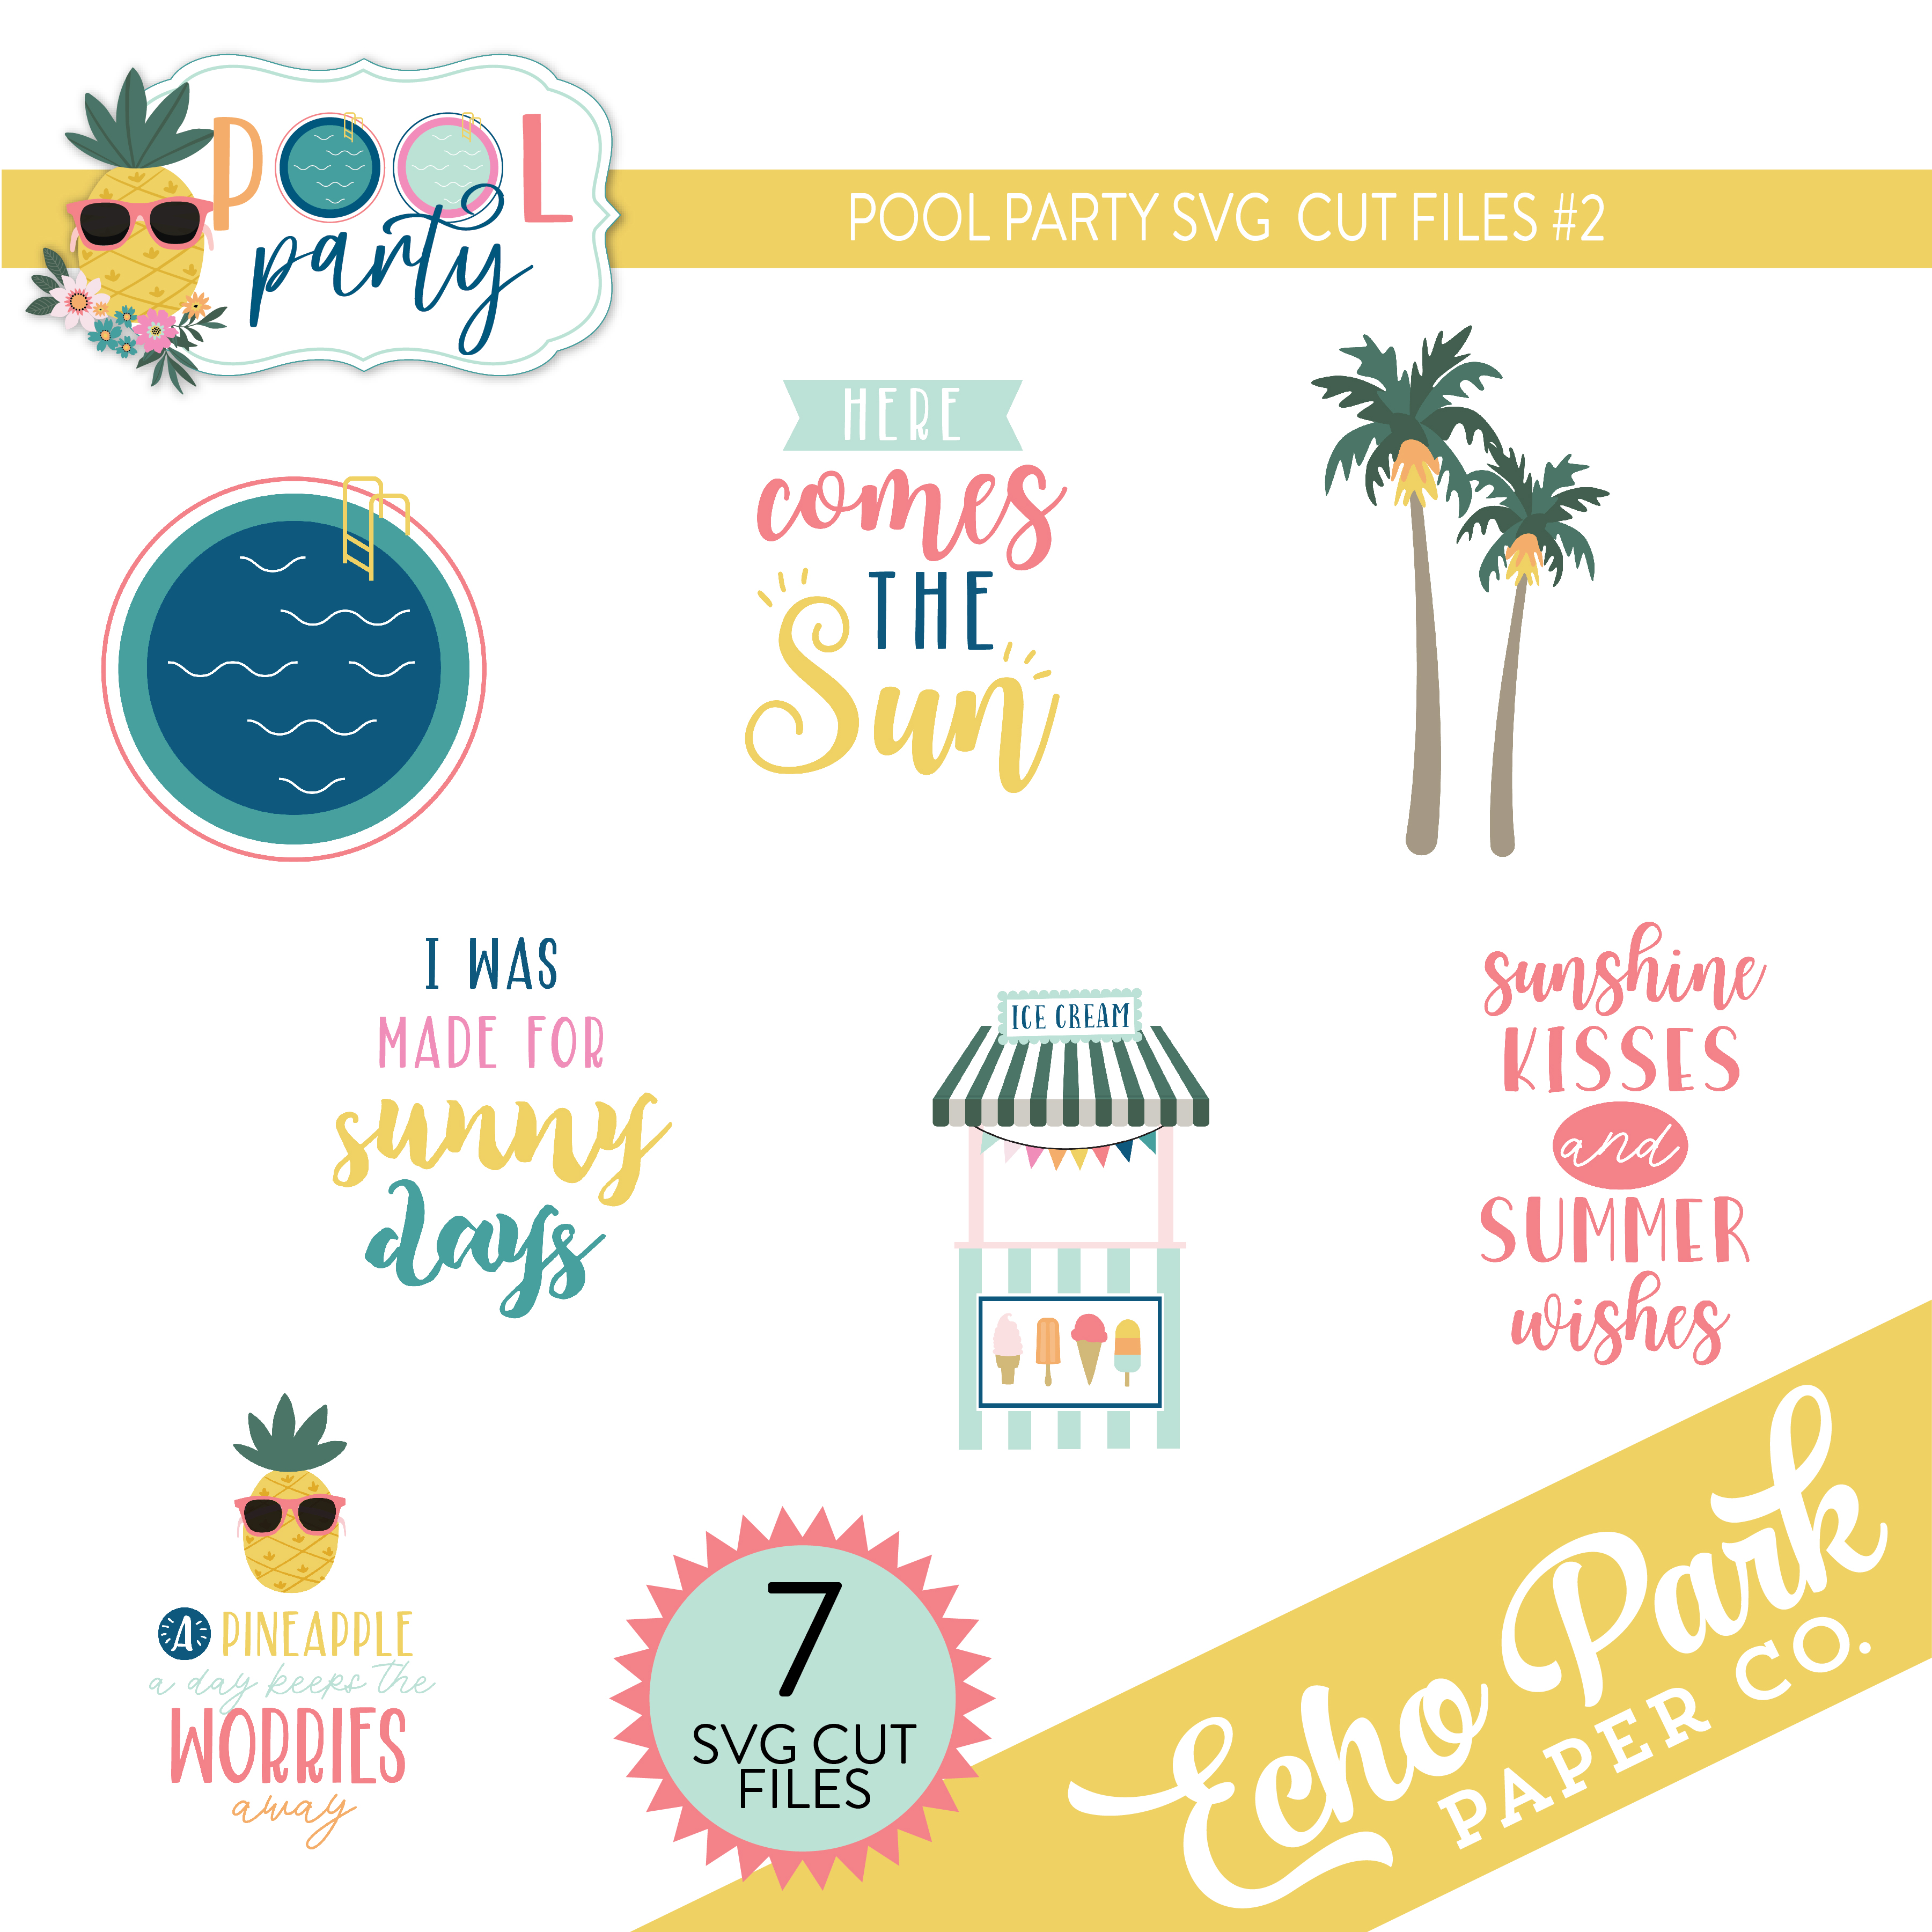 Pool Party #2 Group SVG Cut Files